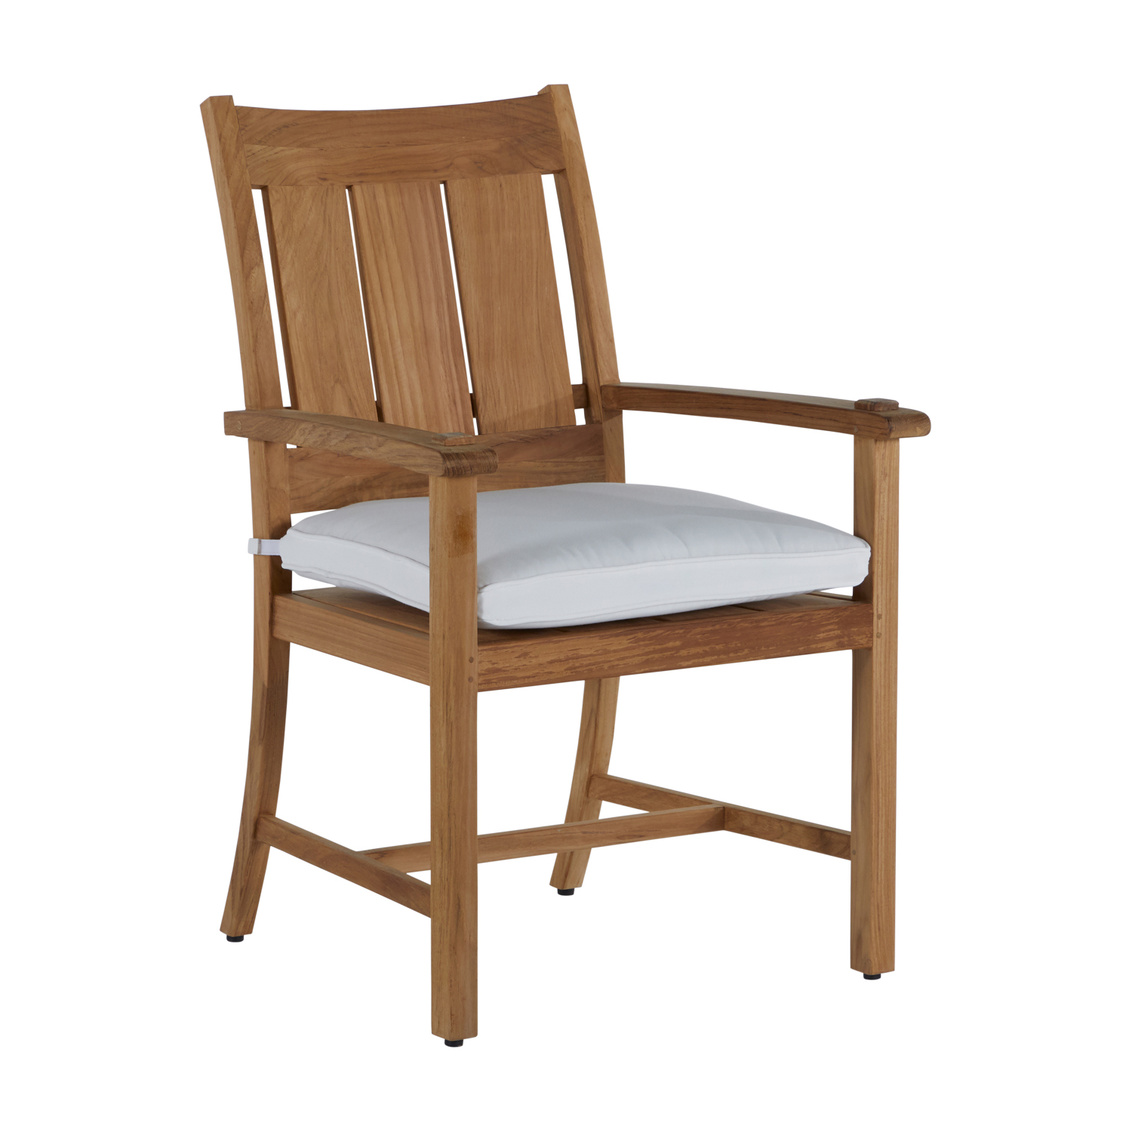 croquet teak arm chair in natural teak – frame only product image